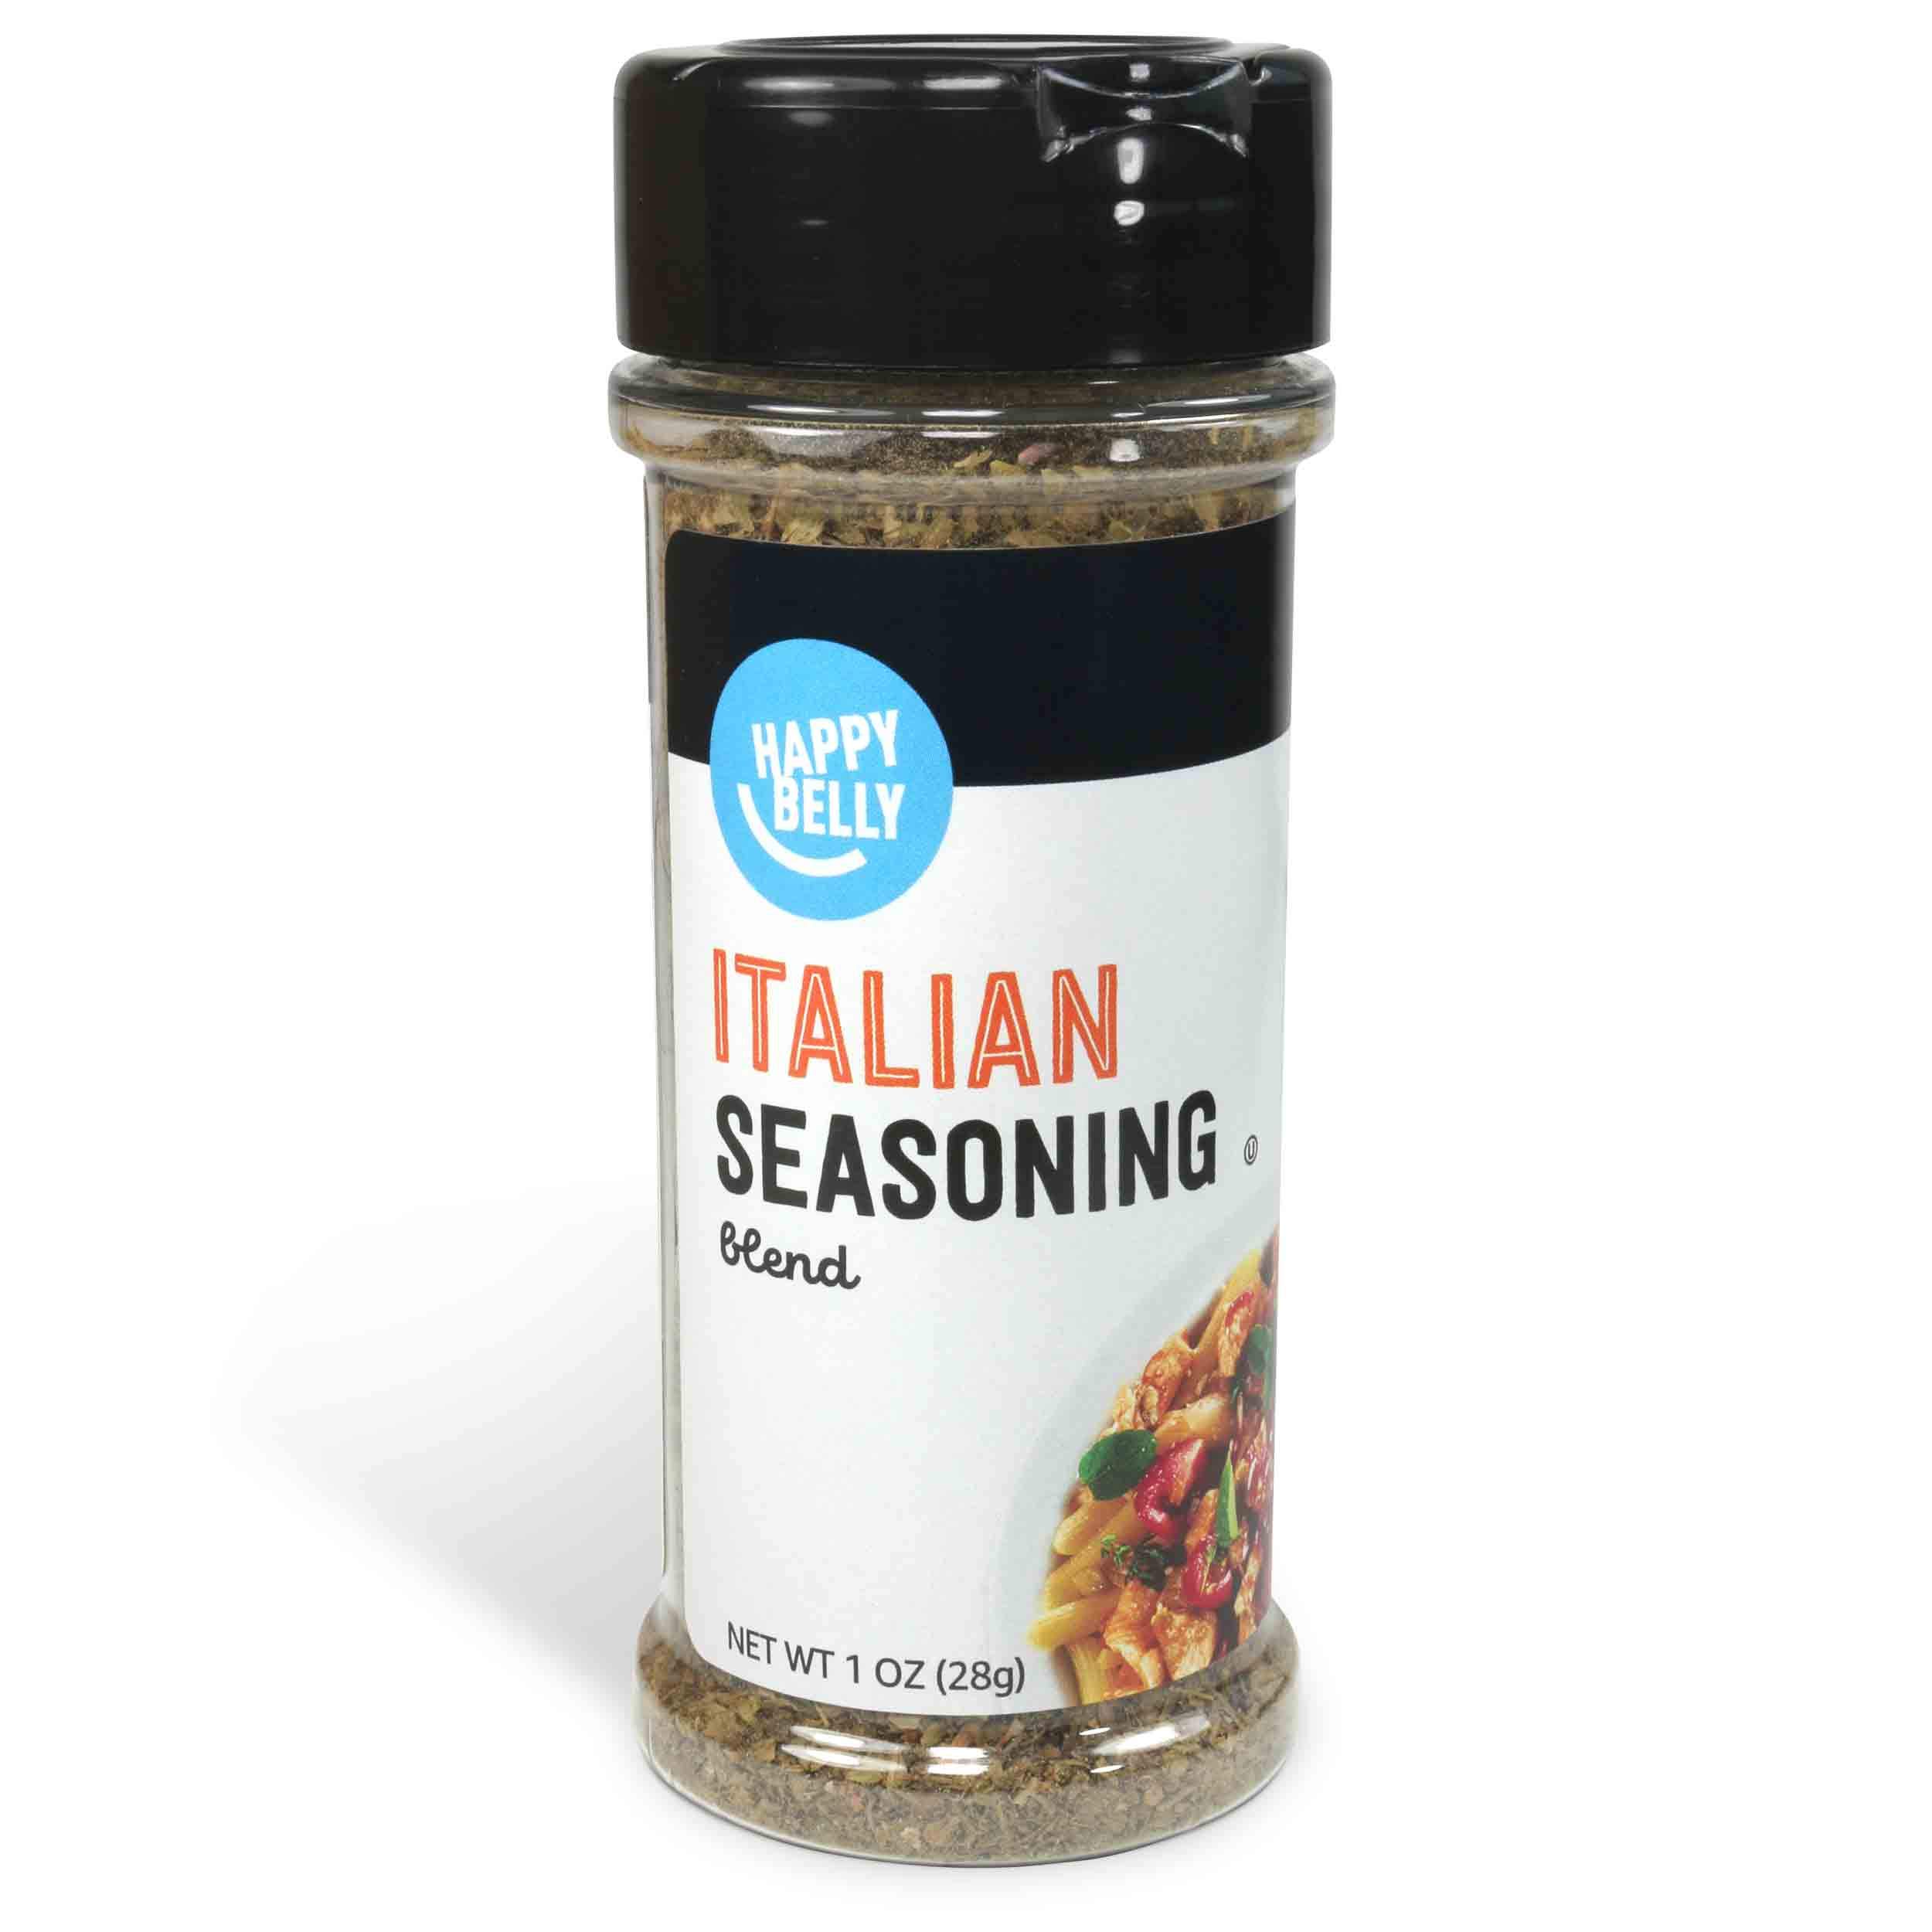 1-Oz Happy Belly Italian Seasoning Blend $1.59 + Free Shipping w/ Prime or on orders over $35